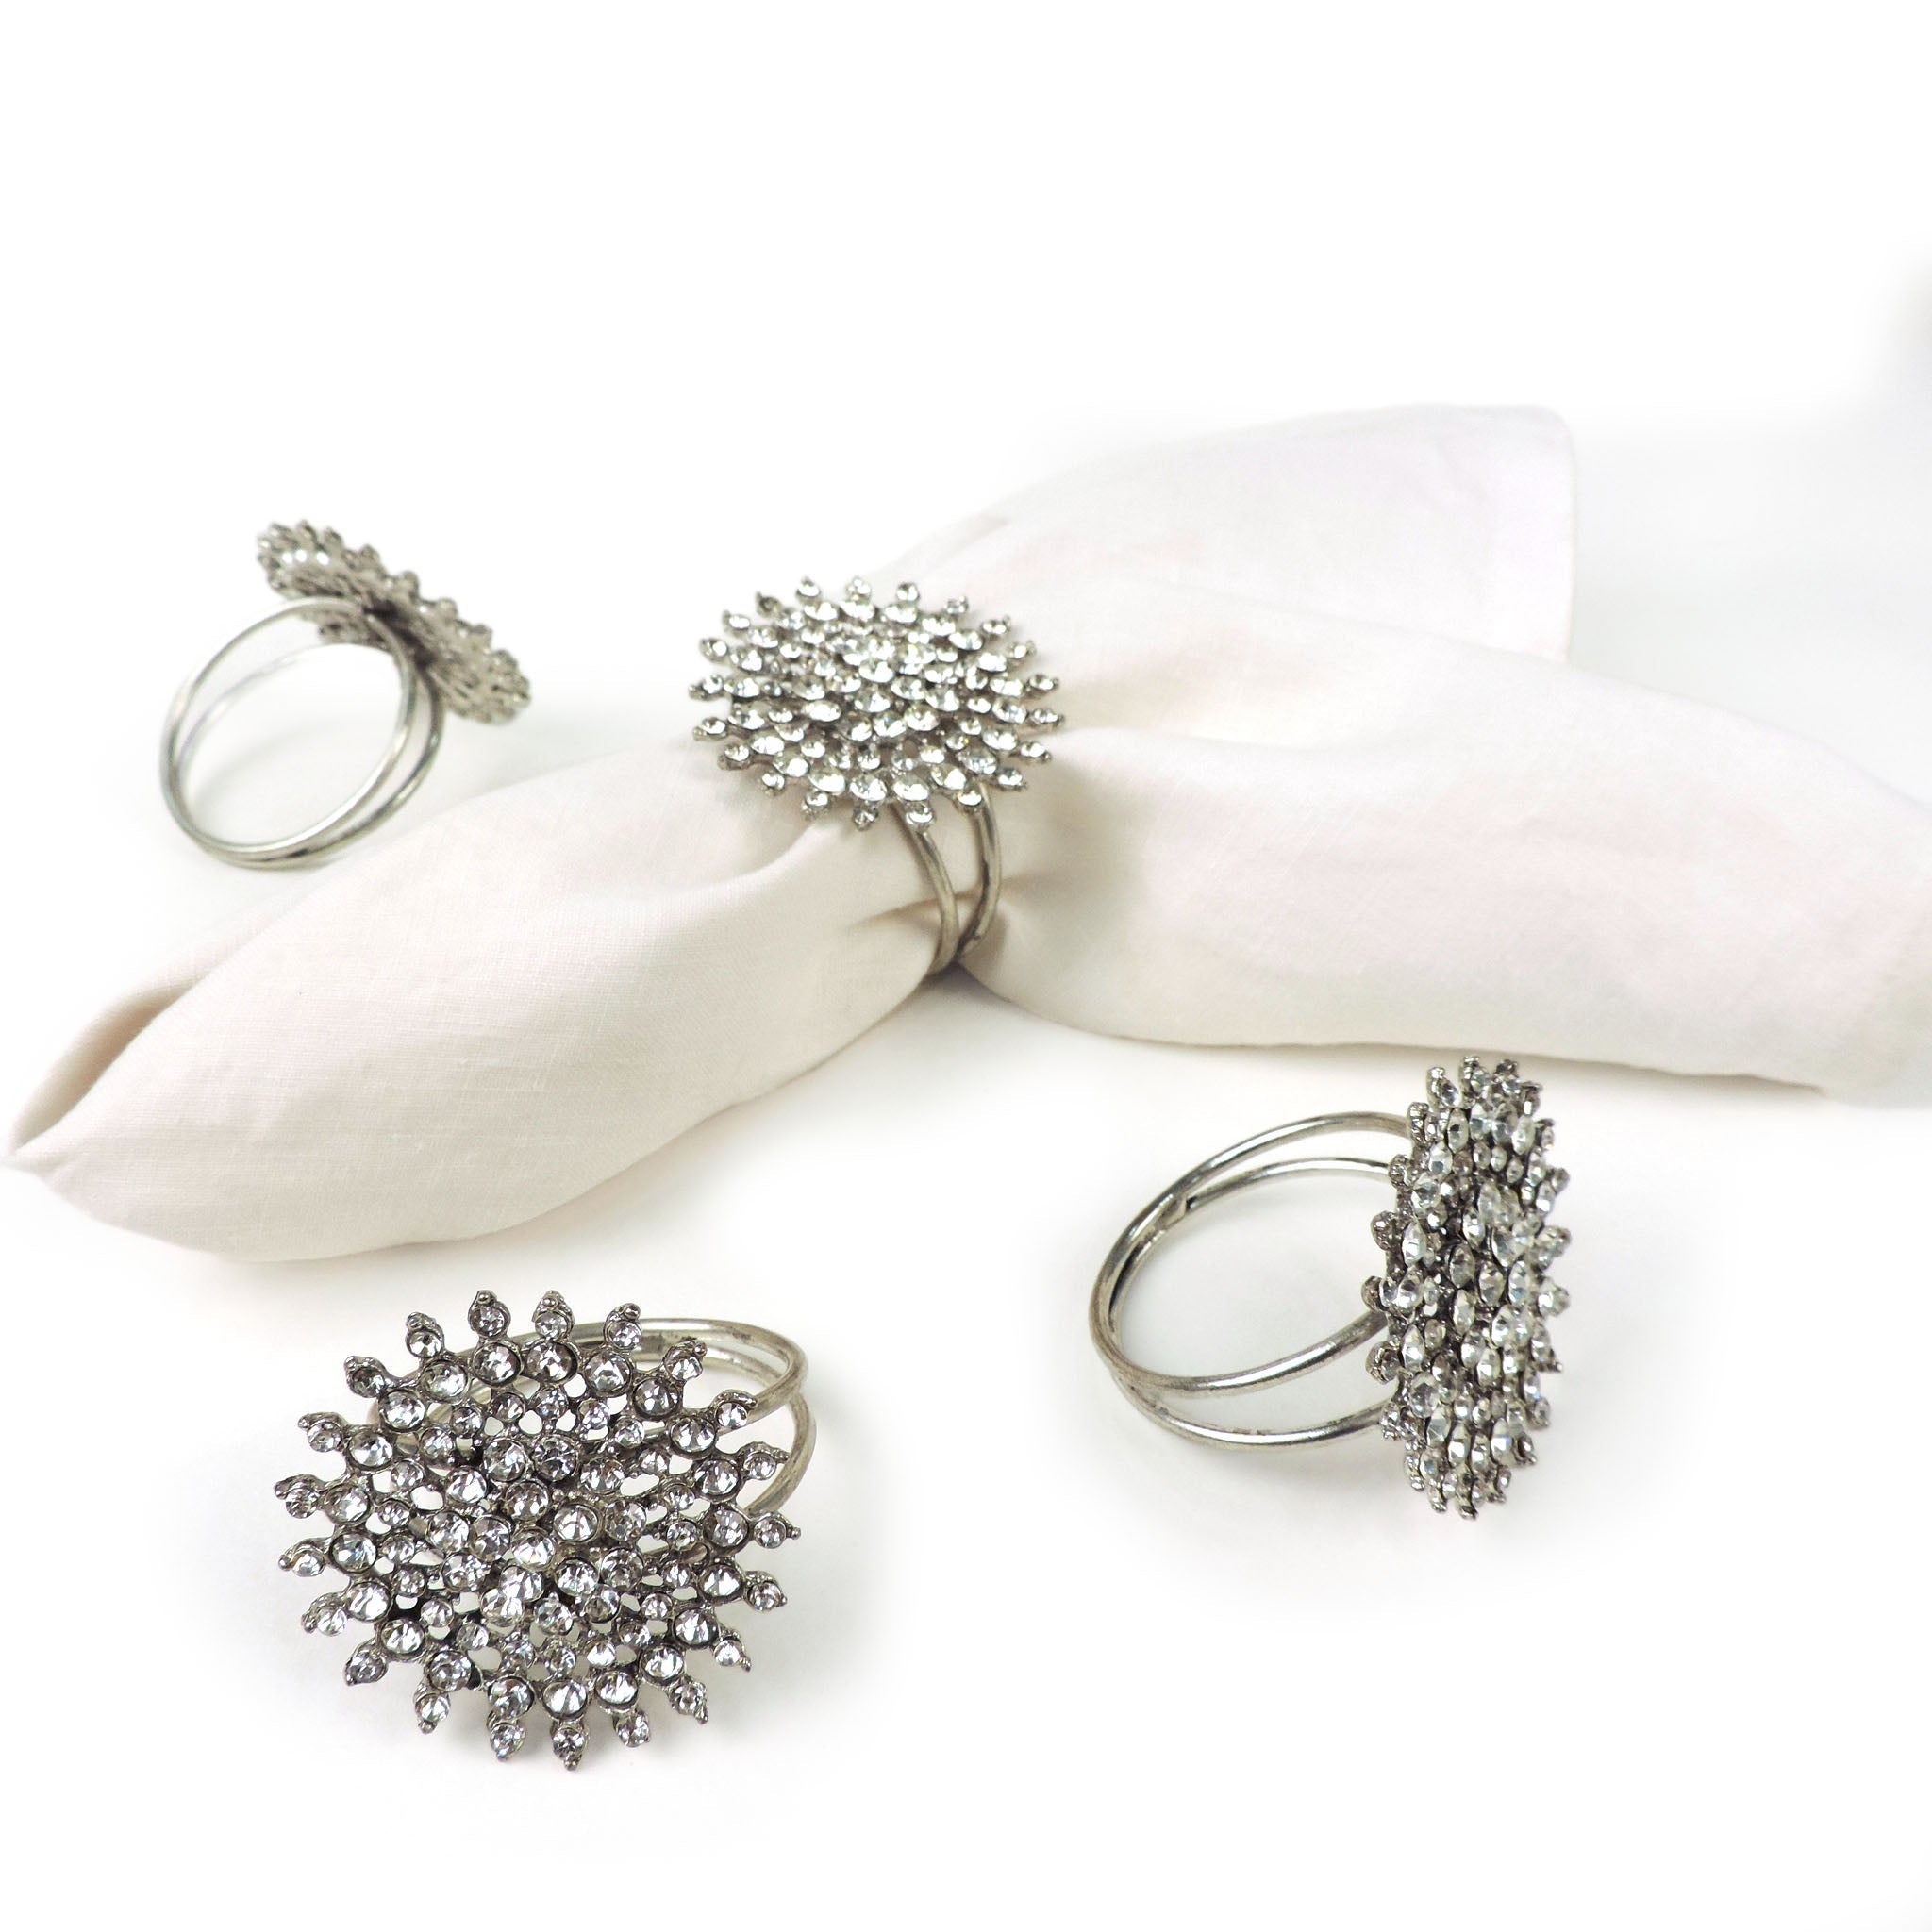 Bold & Beautiful Jeweled Napkin Ring in Silver, Set of 4